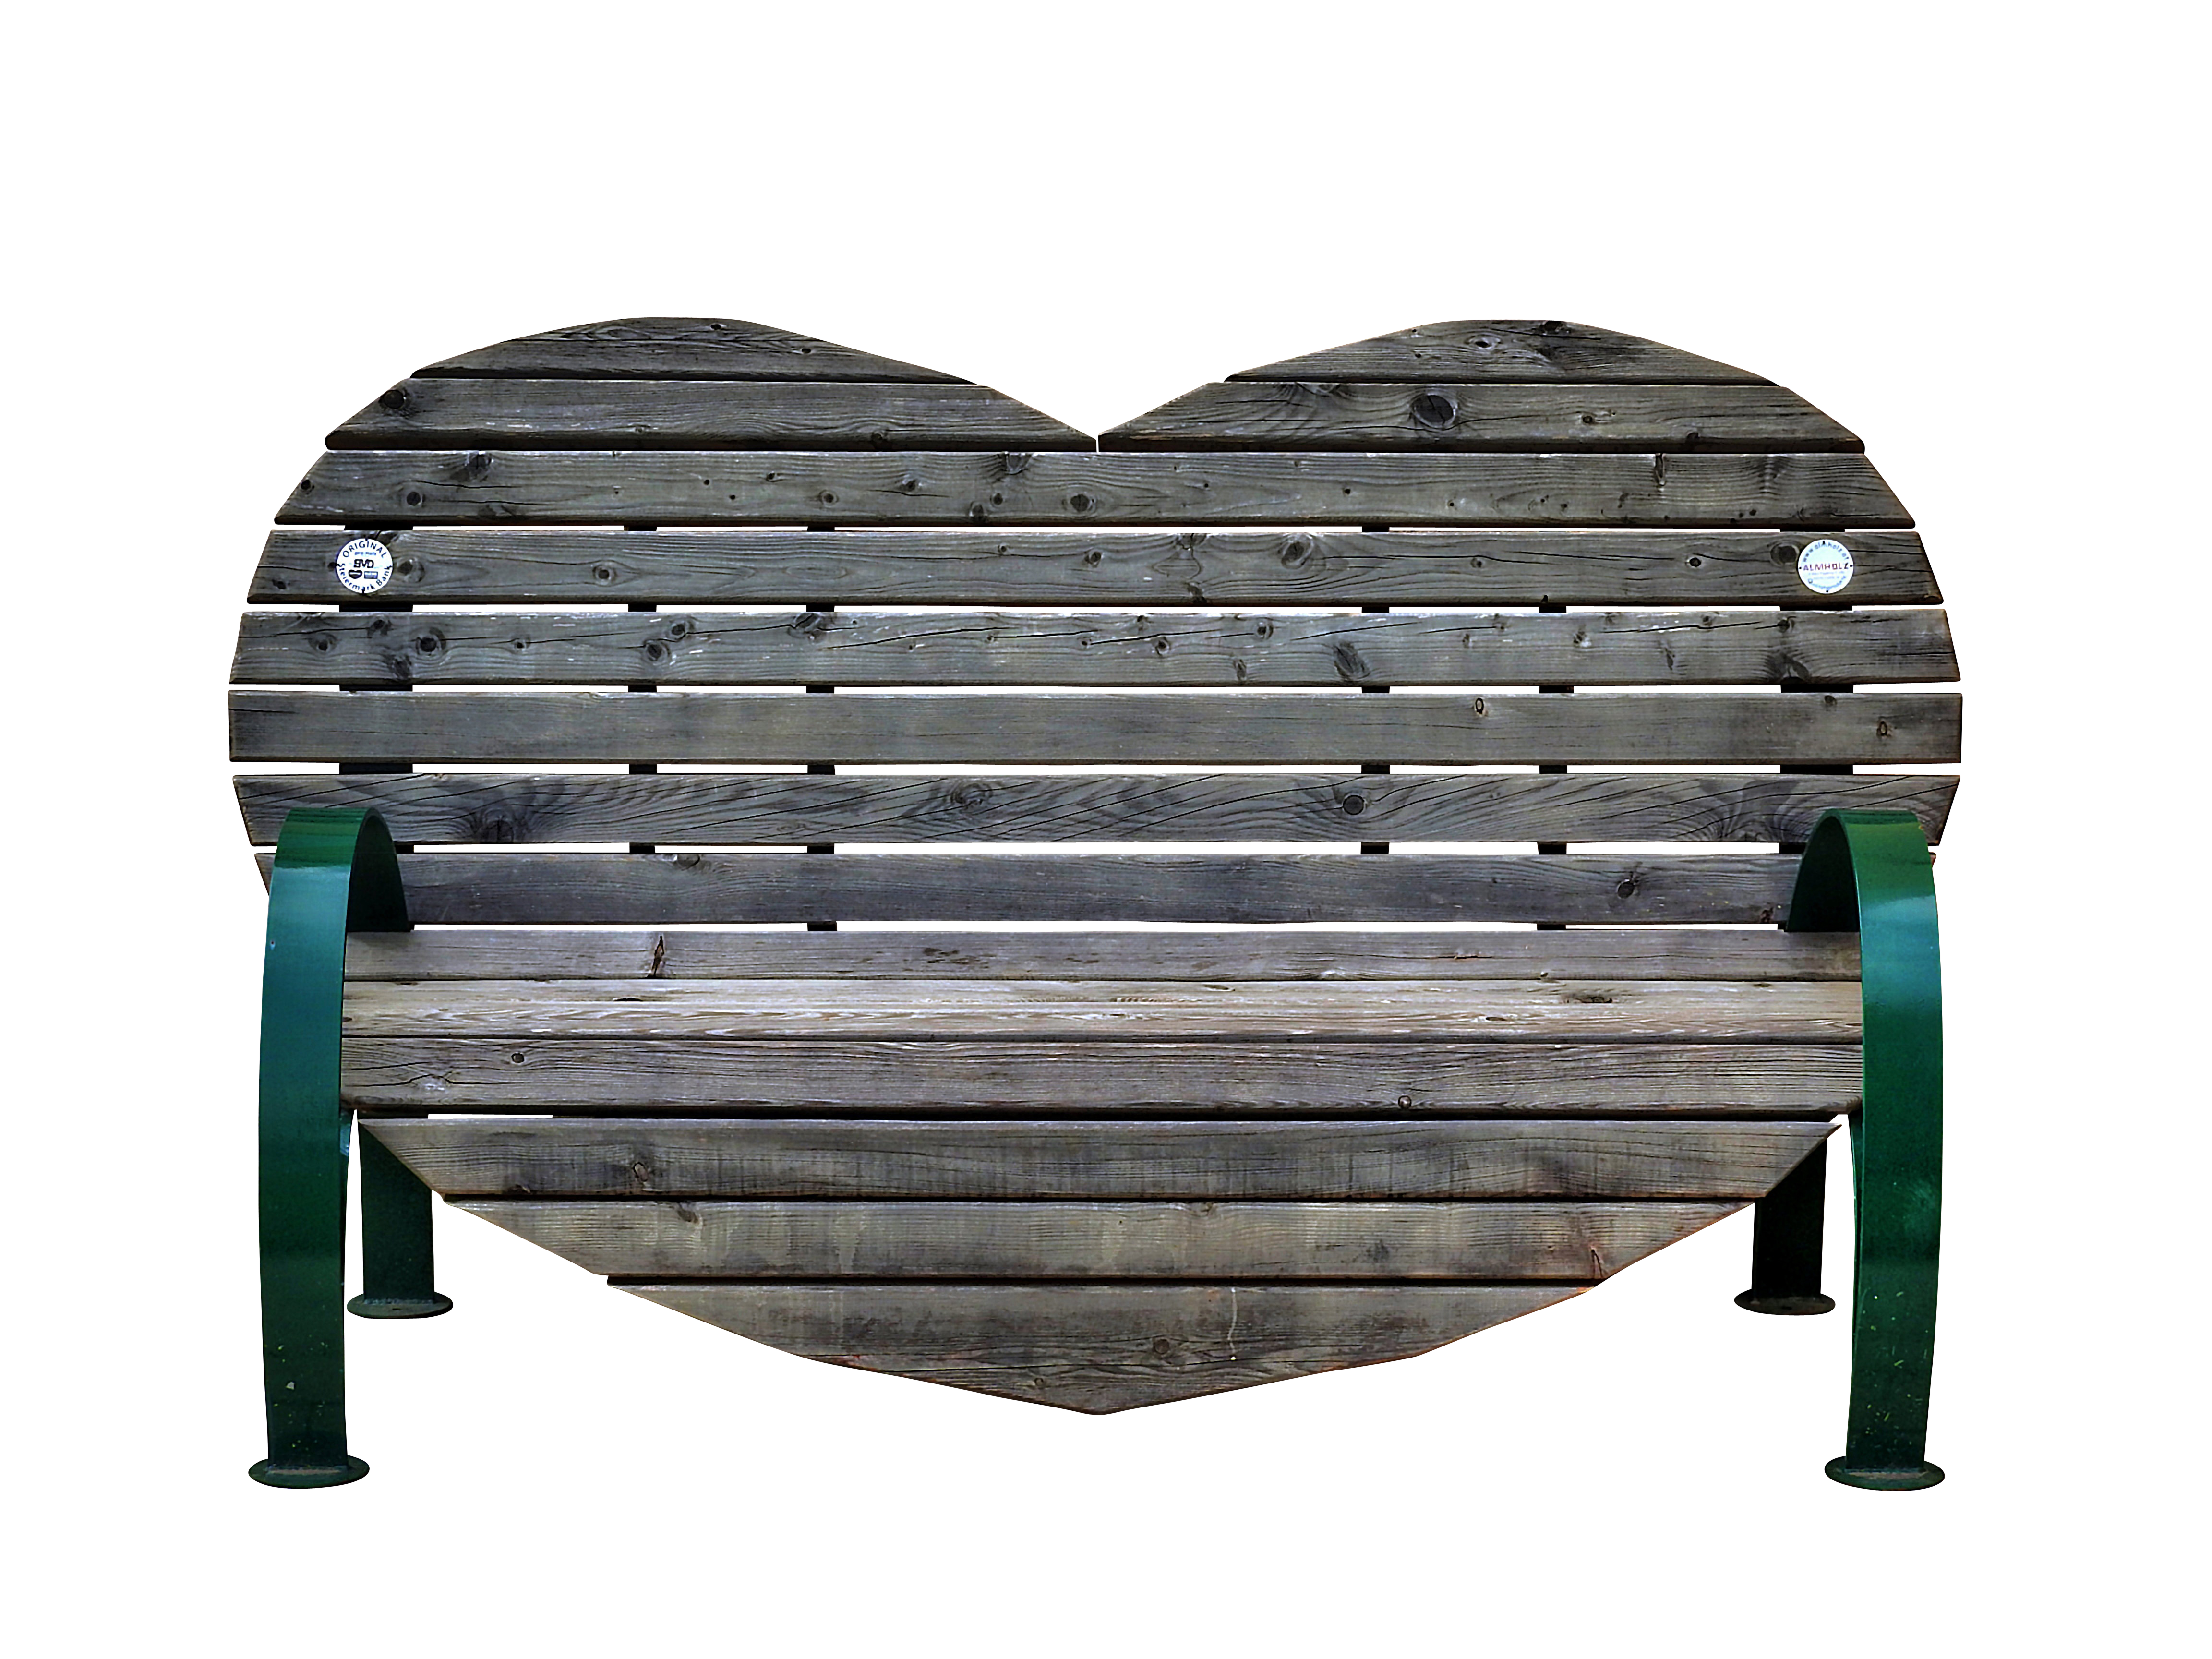 A Wood Bench With Green Metal Armrests